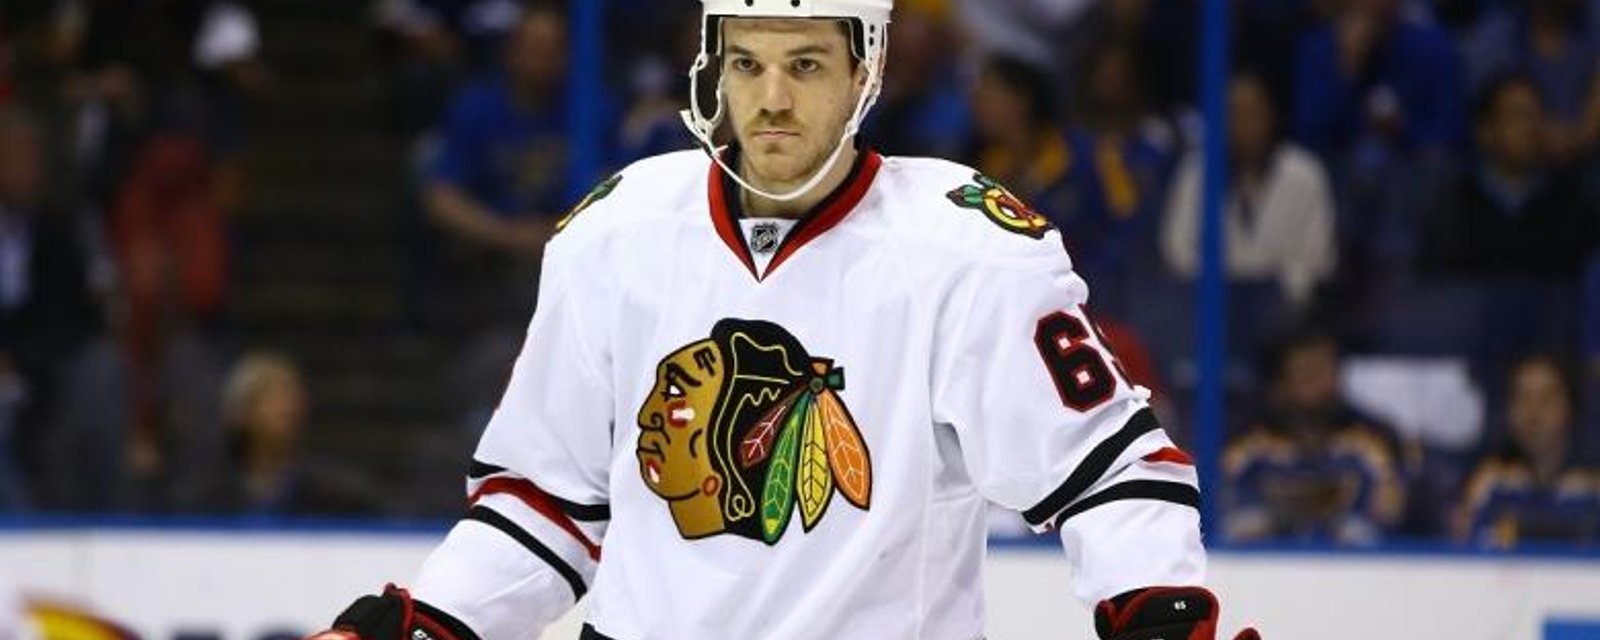 Report: Shaw's agent says reports of his demands were fabricated.